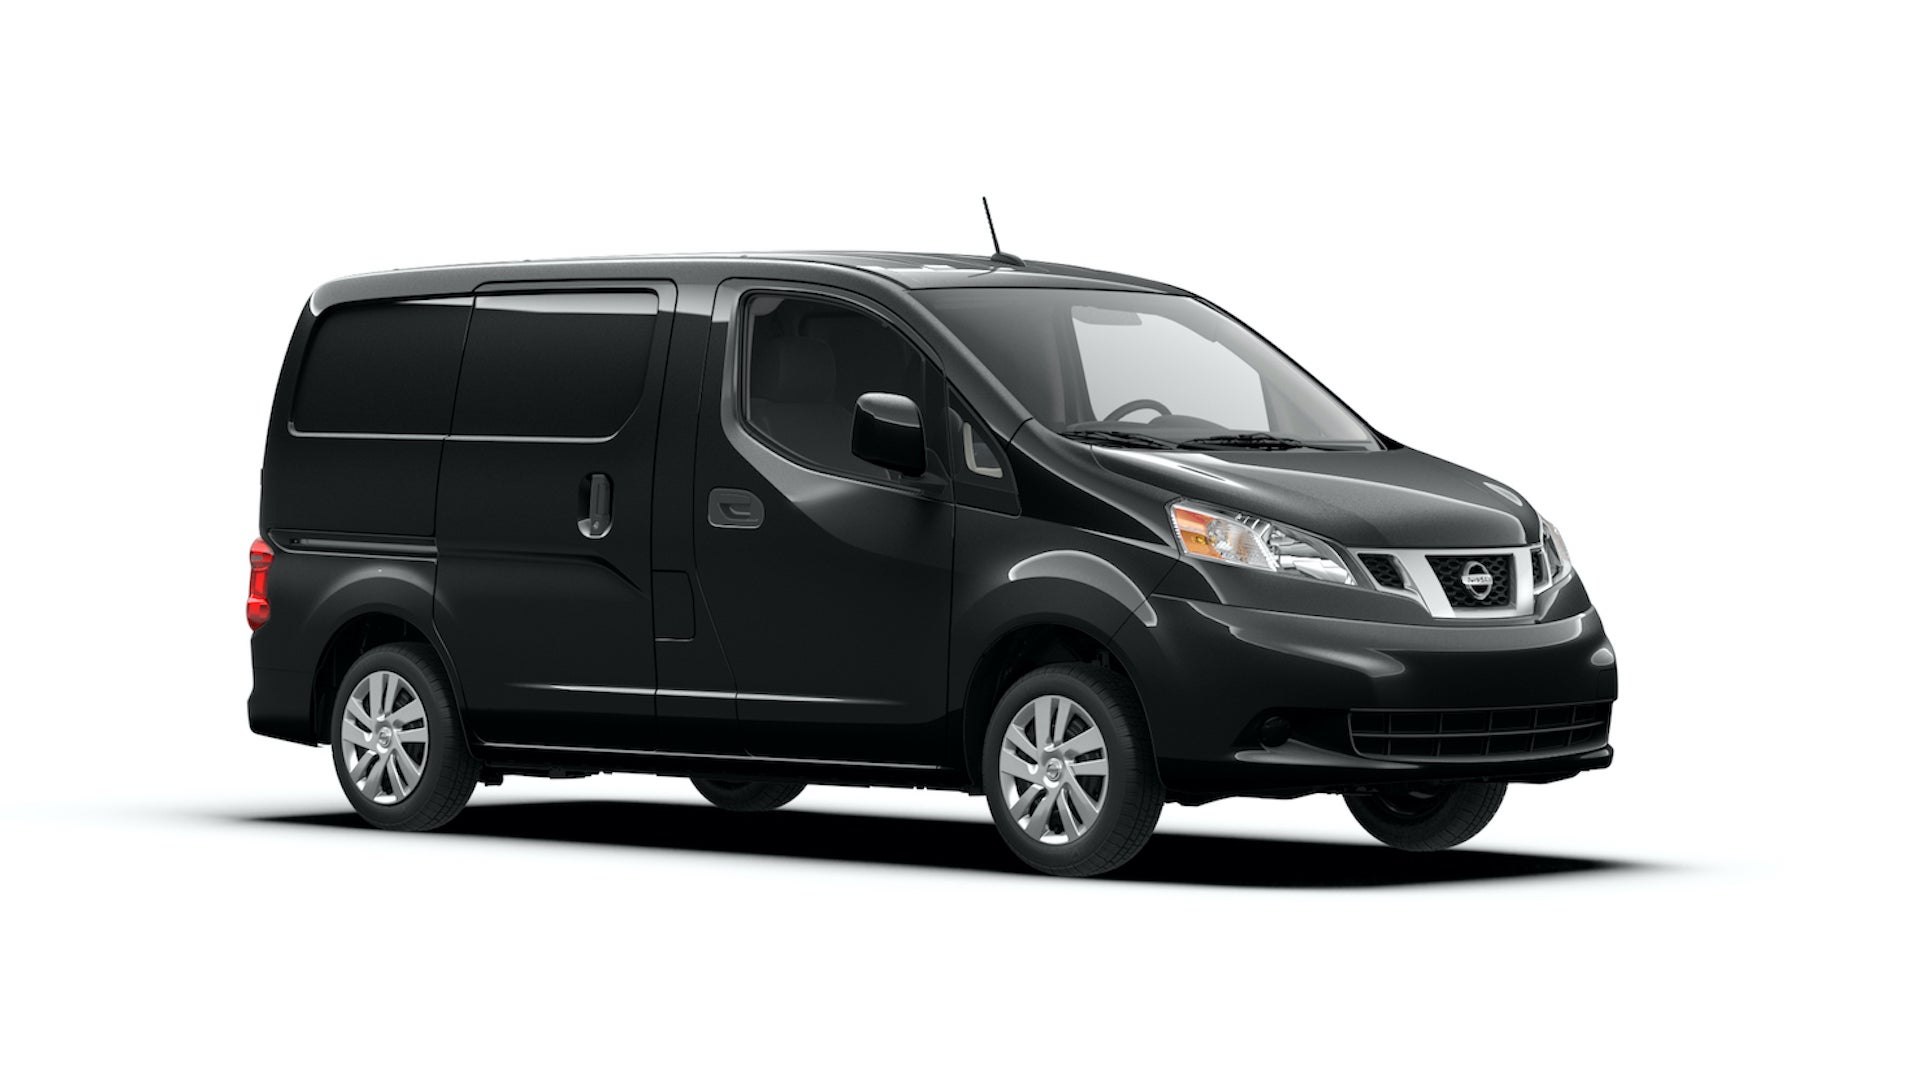 Nissan on Track for 200,000 Cumulative Sales of NV200 by End of